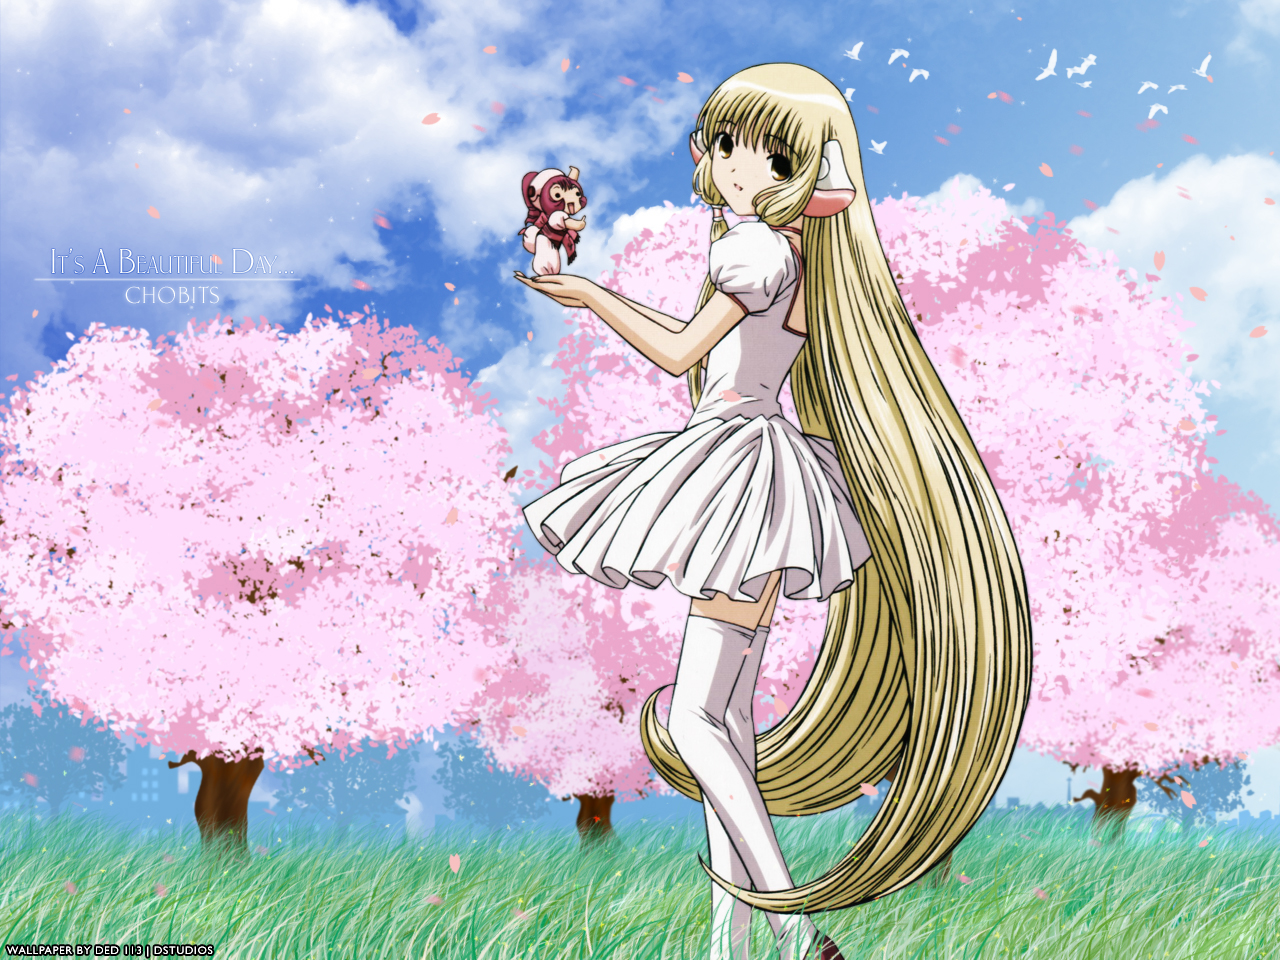 Nice Images Collection: Chobits Desktop Wallpapers